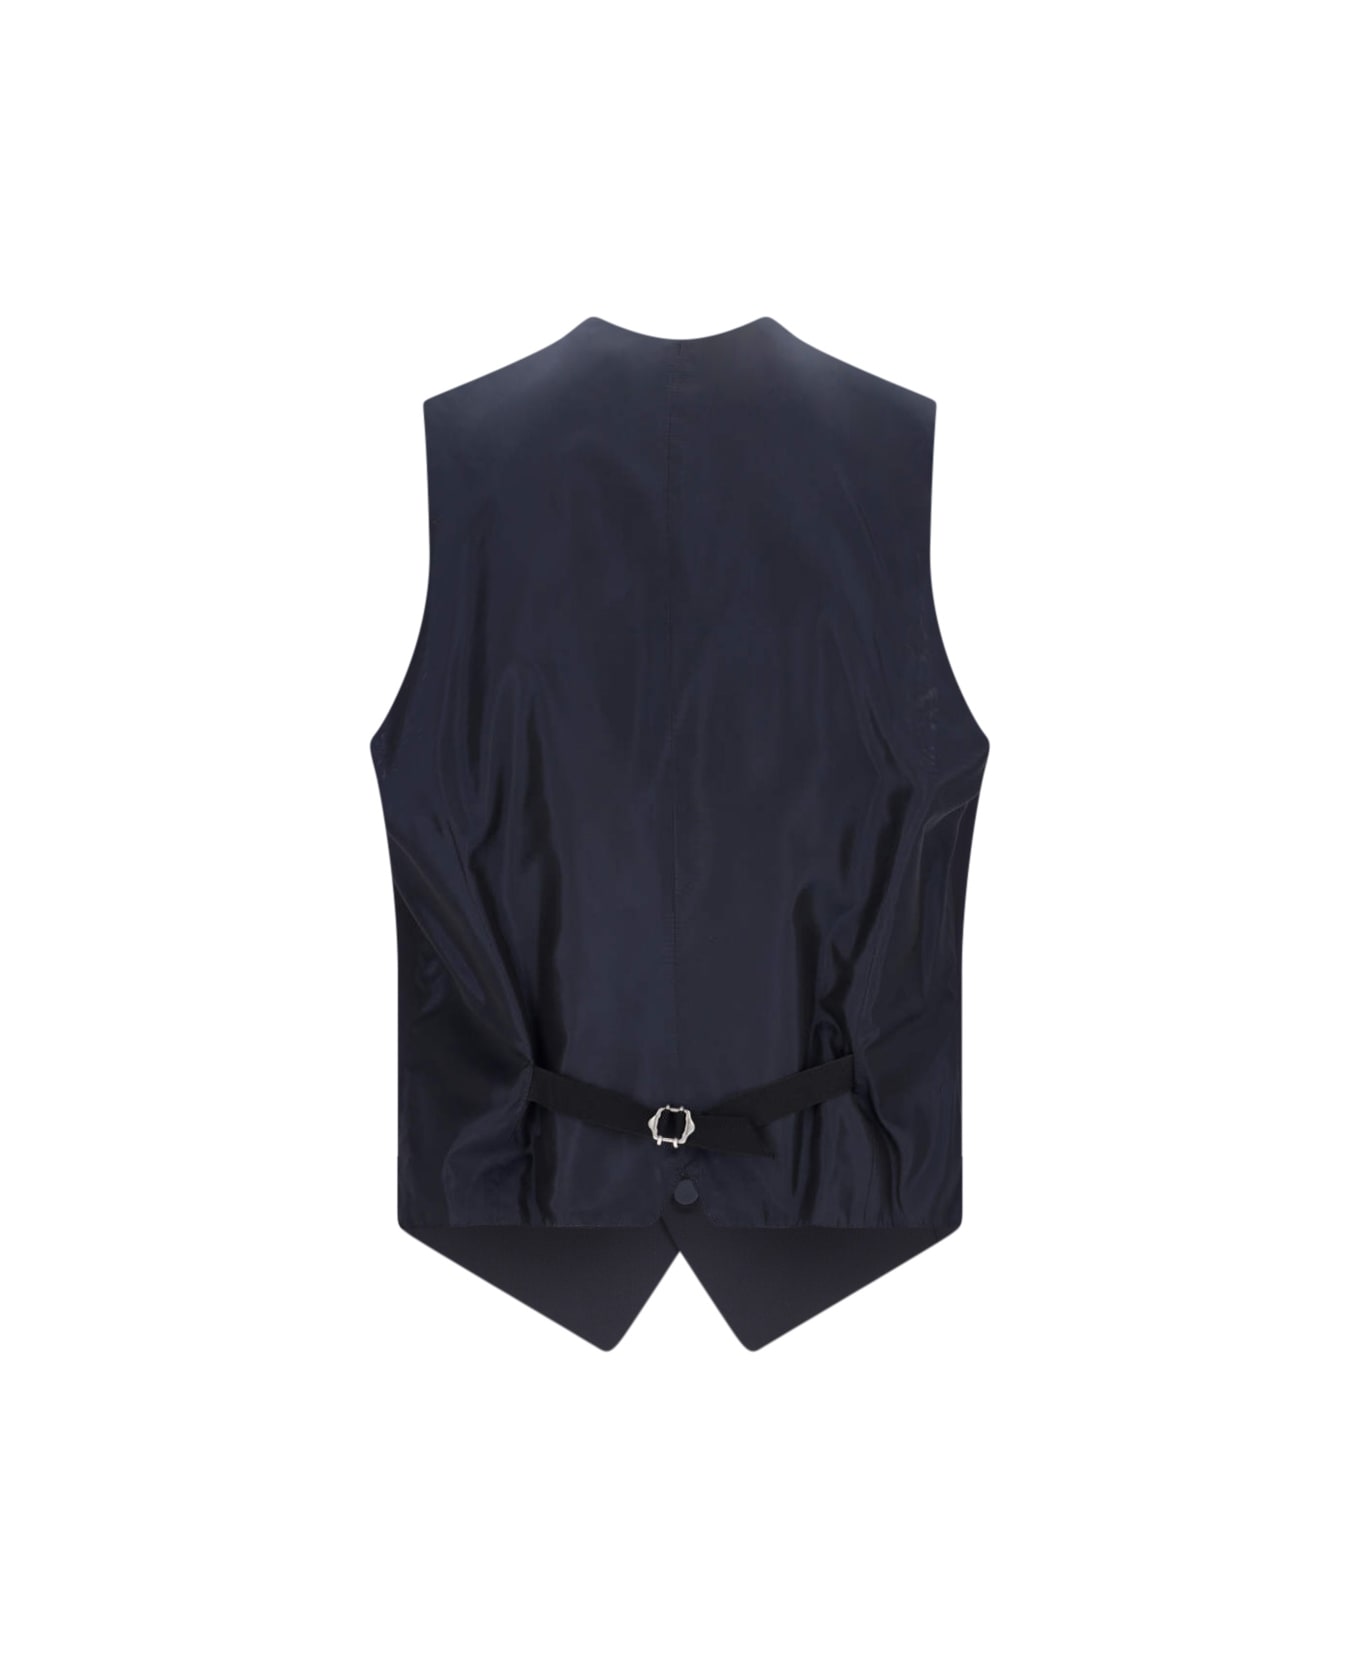 Tagliatore Single-breasted Suit With Vest - Blue